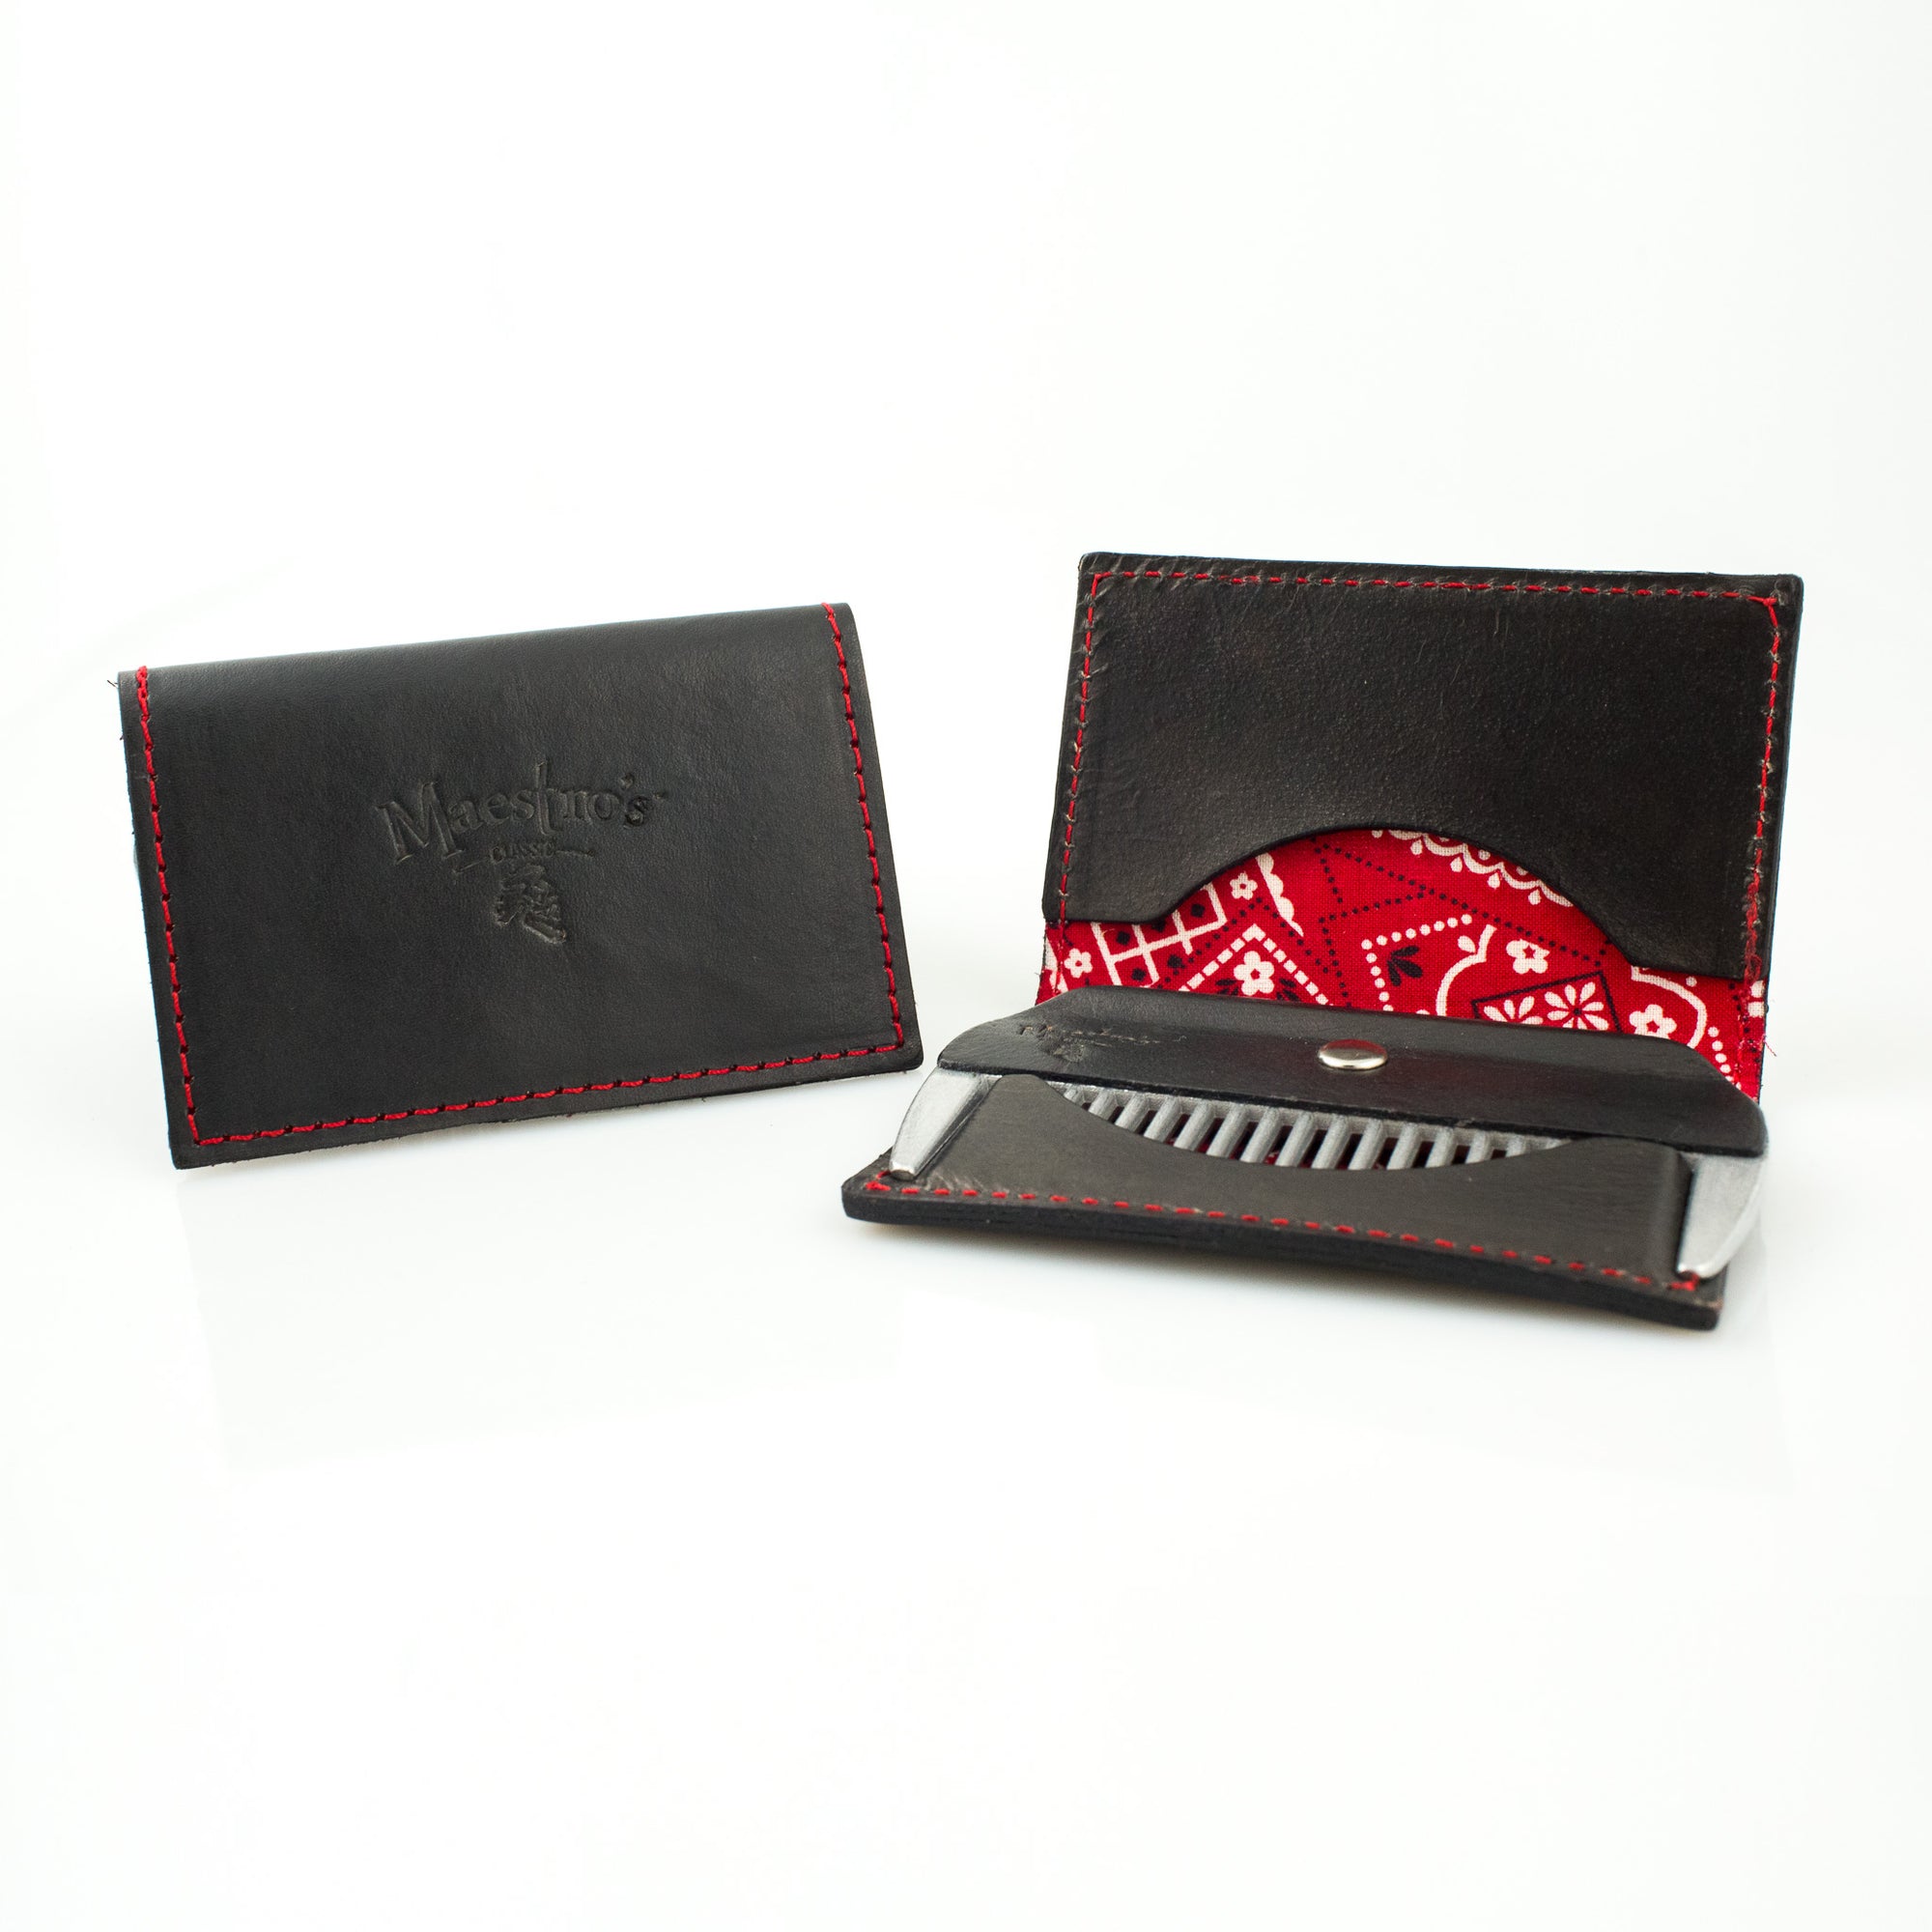 Maestro's Only - Minimalist Wallet with Beard Comb